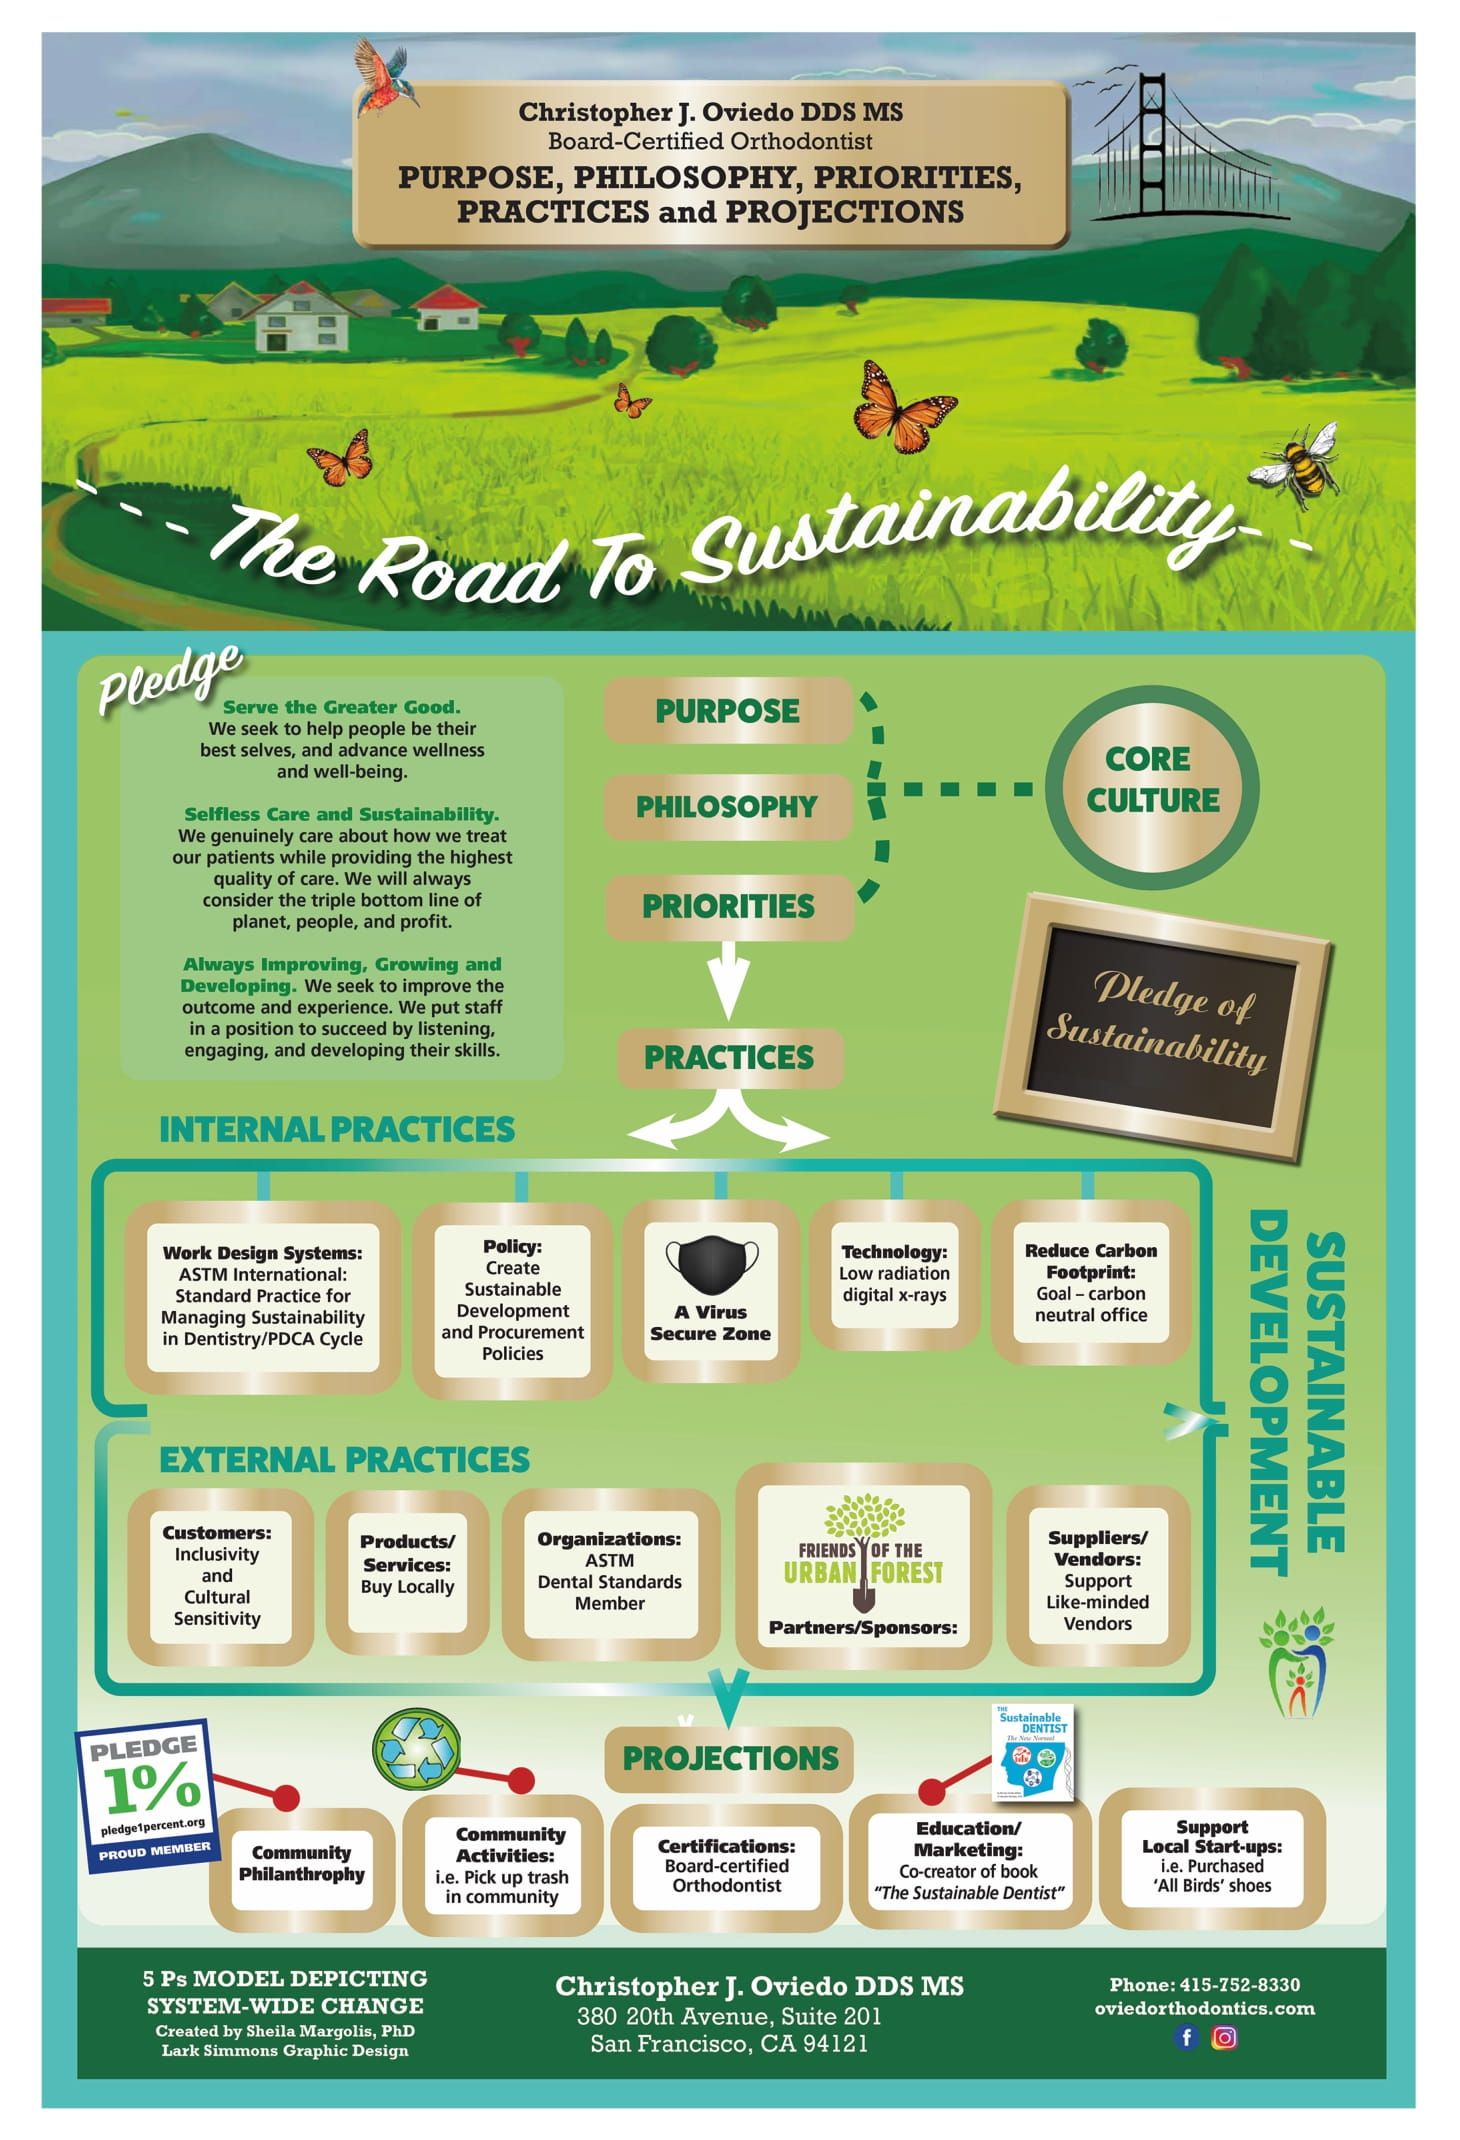 Road to Sustainability